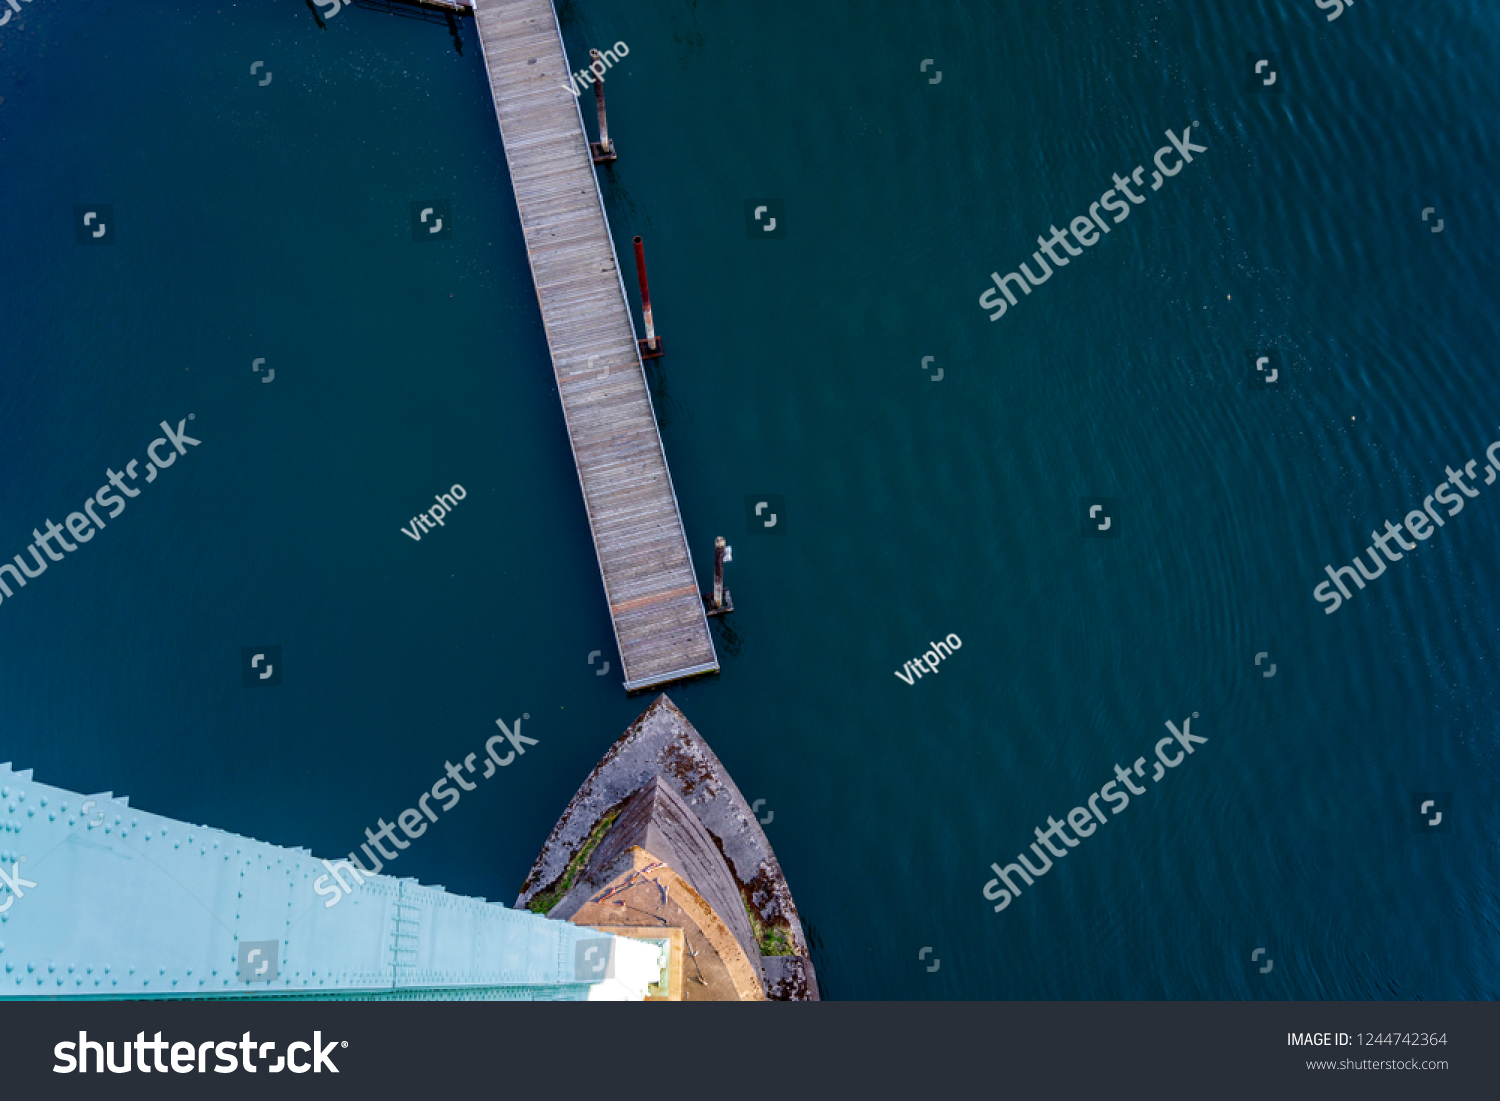 Top view of the support of the gothic St Johns bridge over the Willamette River in Portland with a small floating pier with pillars for mooring boats and yachts and dark water surface #1244742364